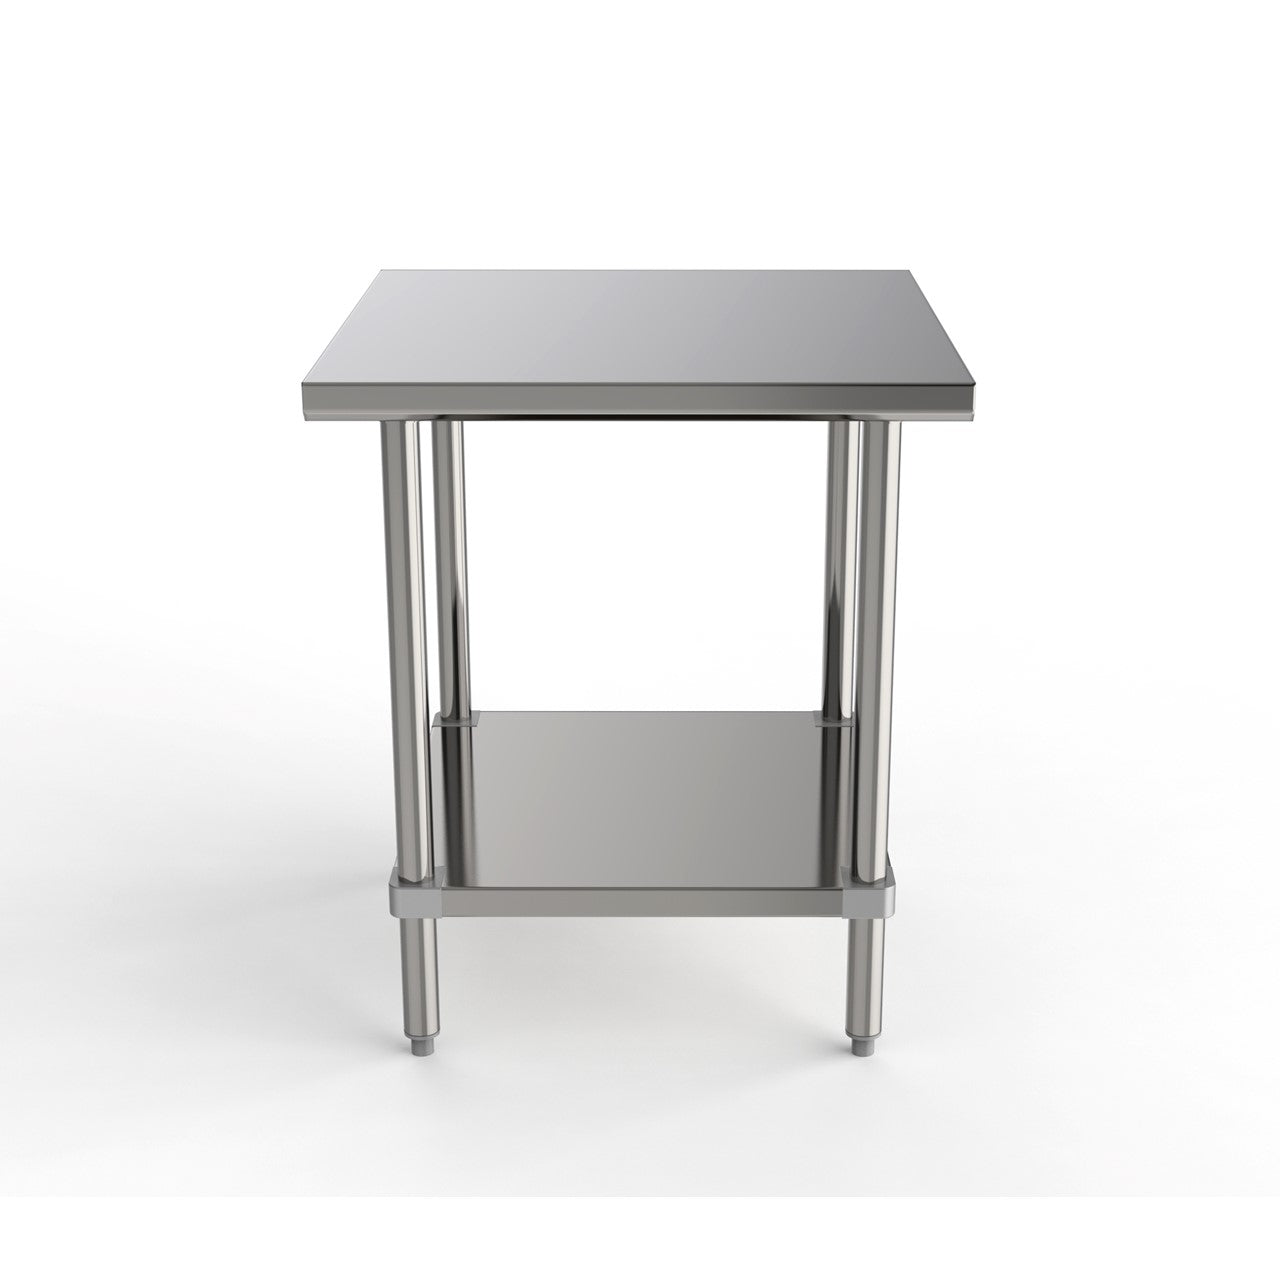 GSW Commercial Grade Flat Top Work Table with Stainless Steel Top, Galvanized Undershelf & Legs, Adjustable Bullet Feet, NSF/ETL Approved to Meet Sanitation Food Service Standard 37 (30"W x 24"L x 35"H)